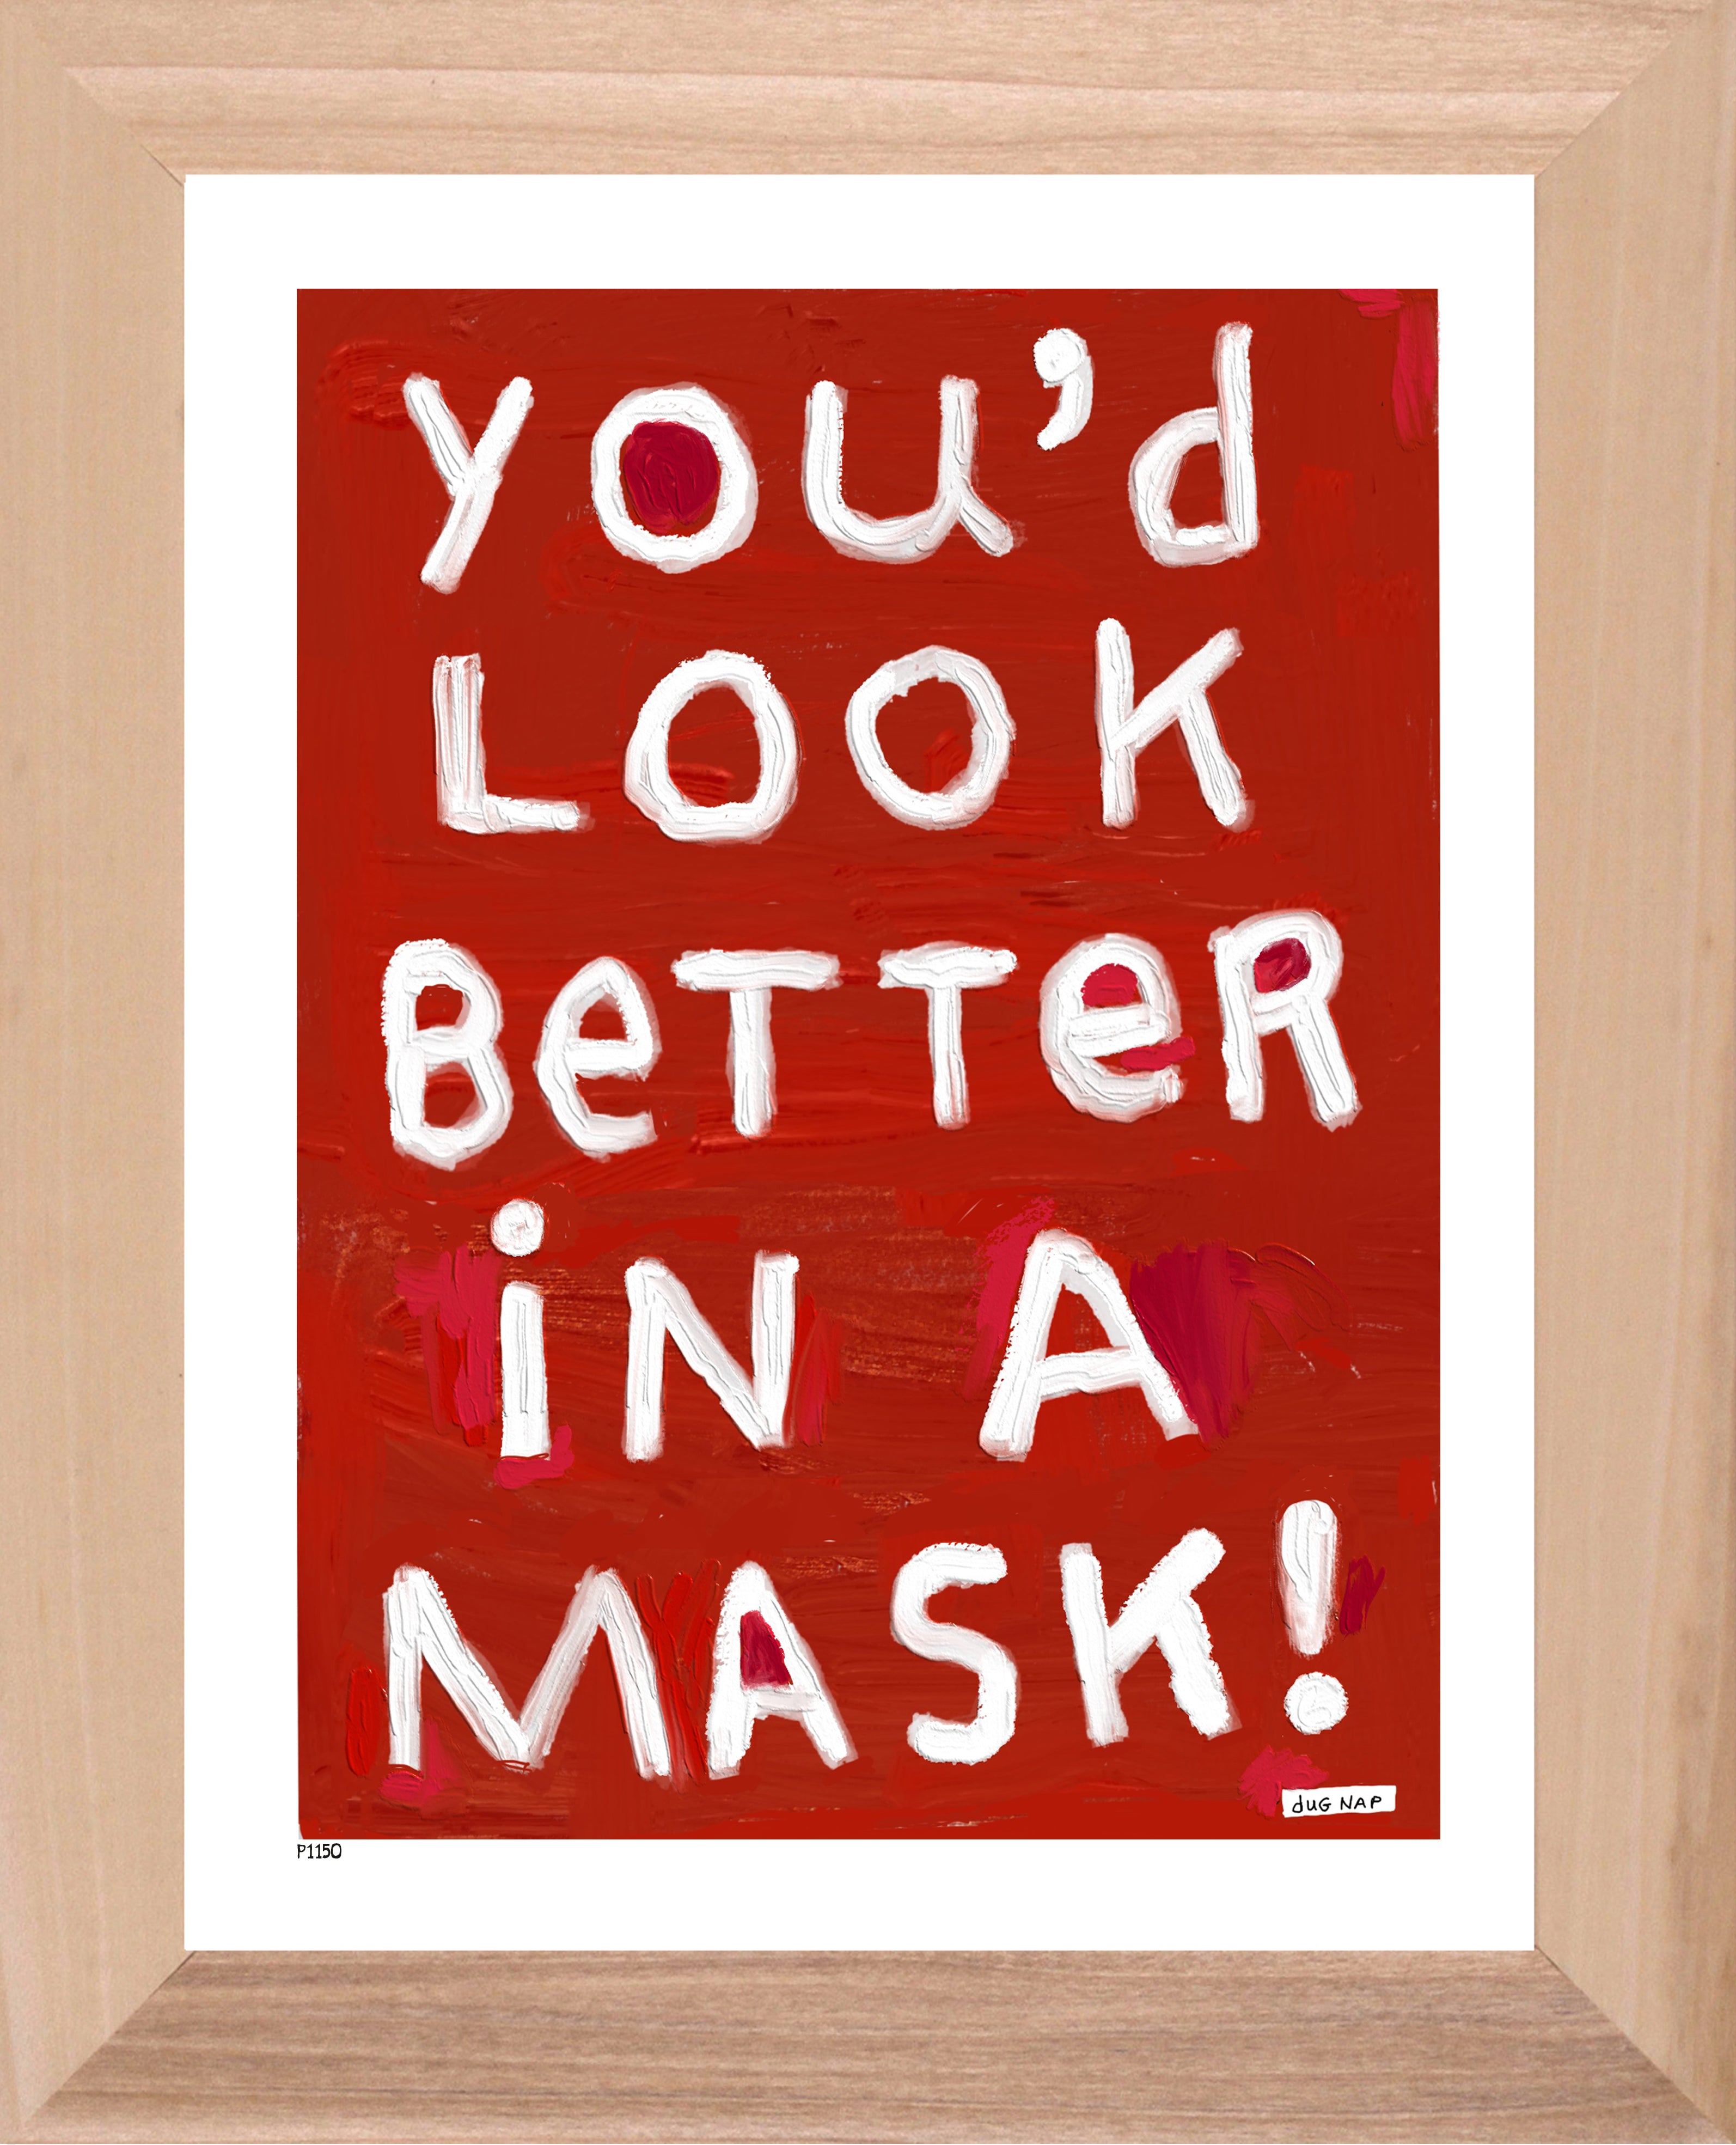 P1150 - Better With A Mask